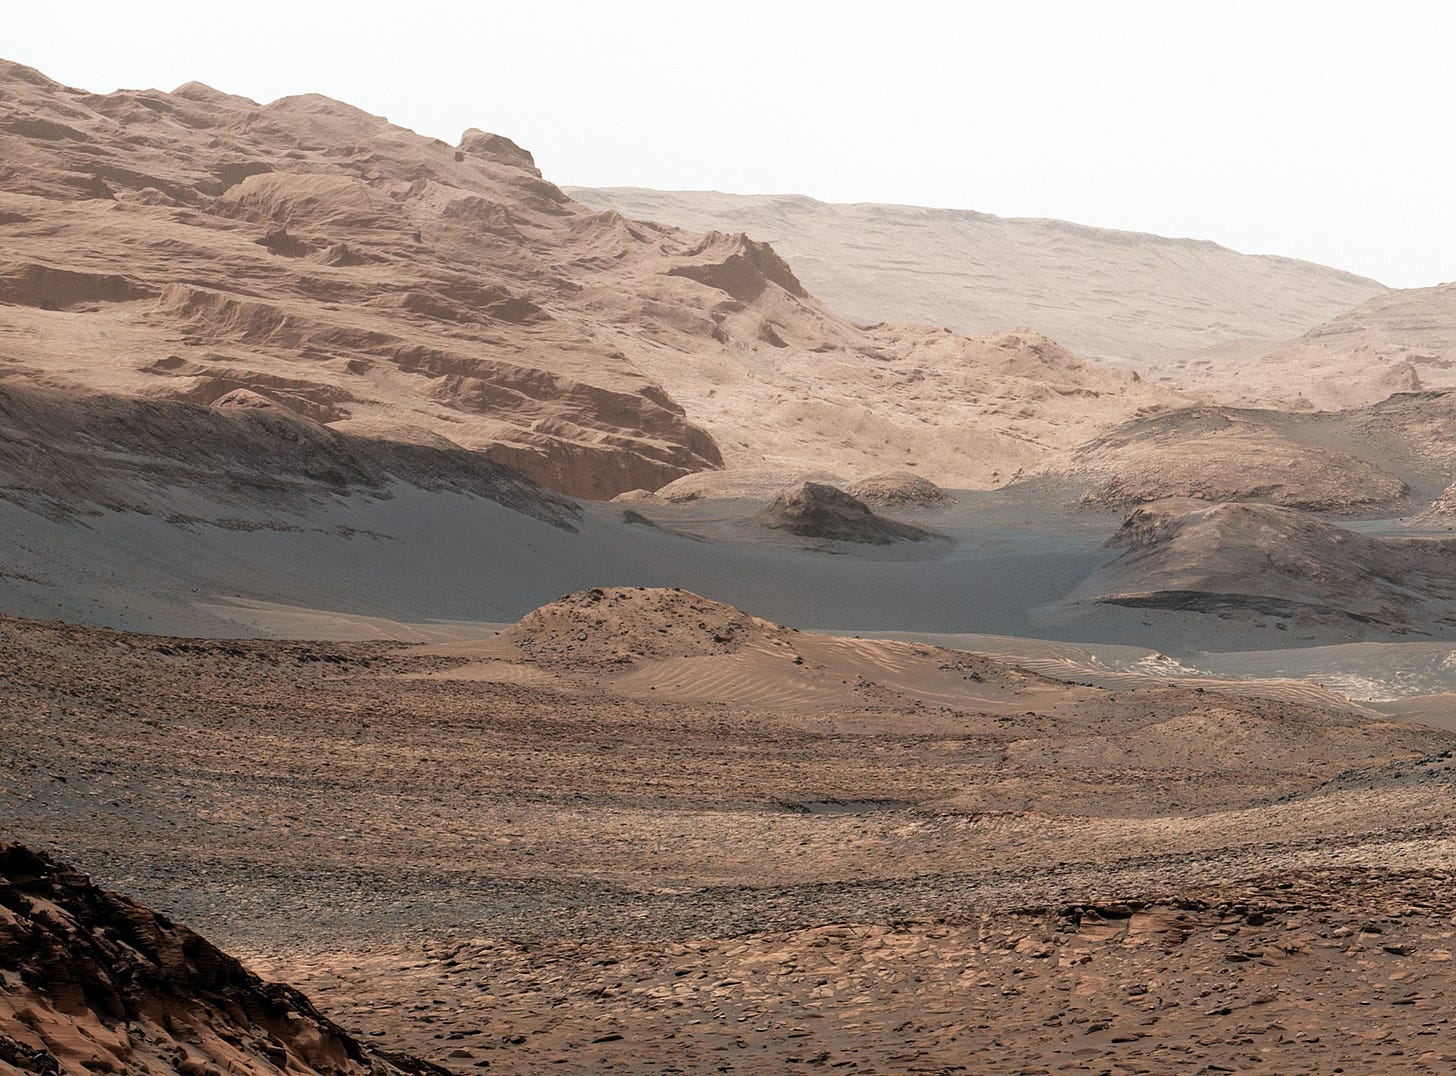 An image of the Martian landscape that looks a bit like the New Mexico desert, with mesas in the distance.